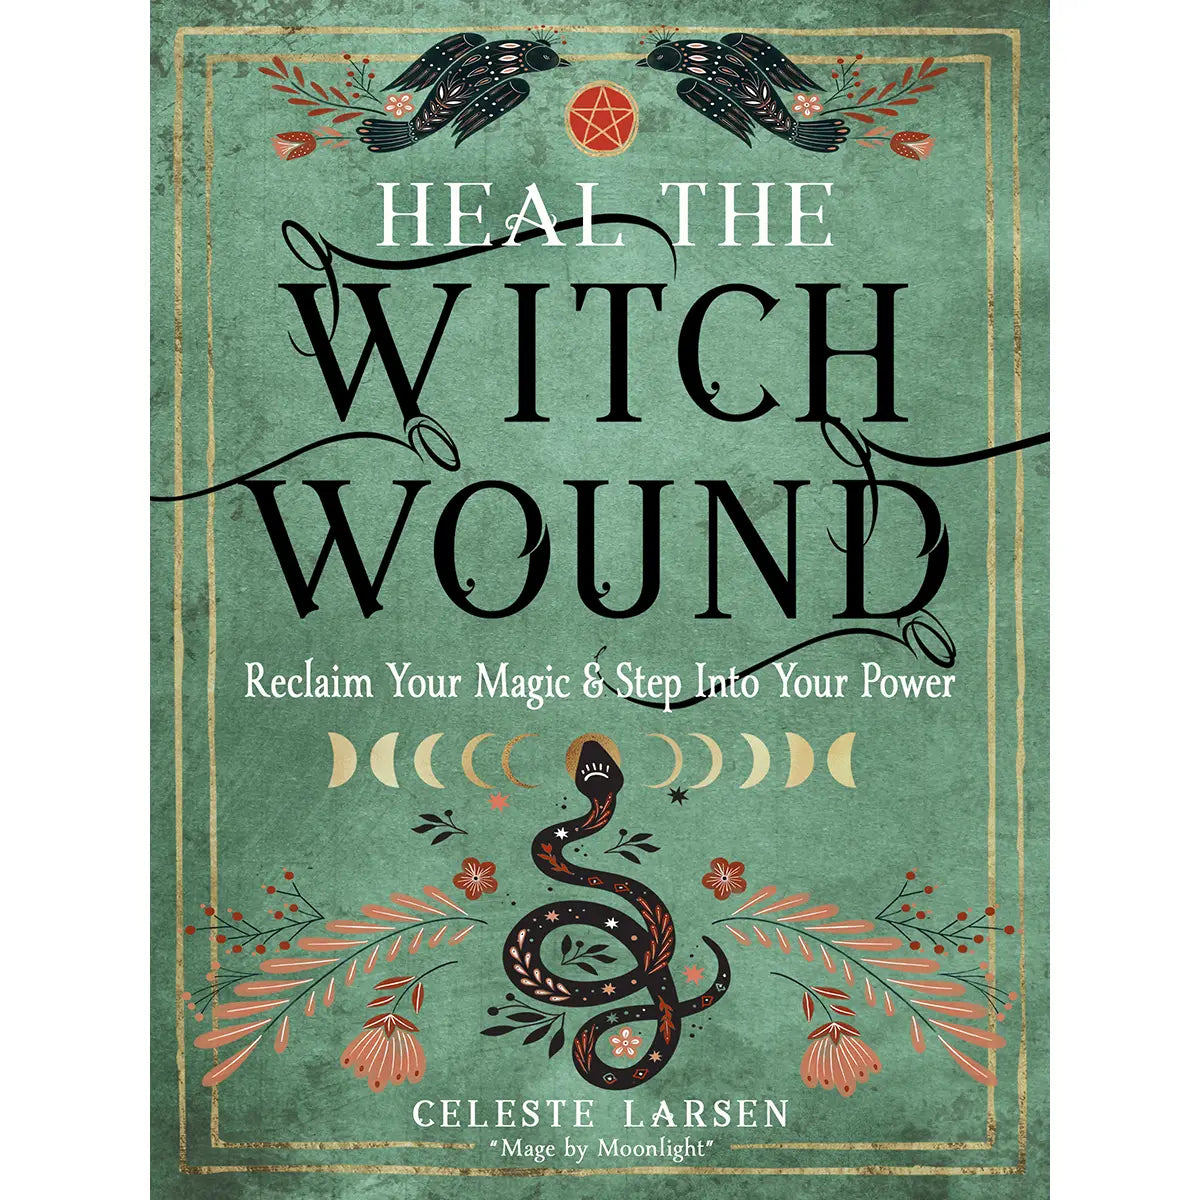 heal the witch wound-reclaim your magic/step in to your power